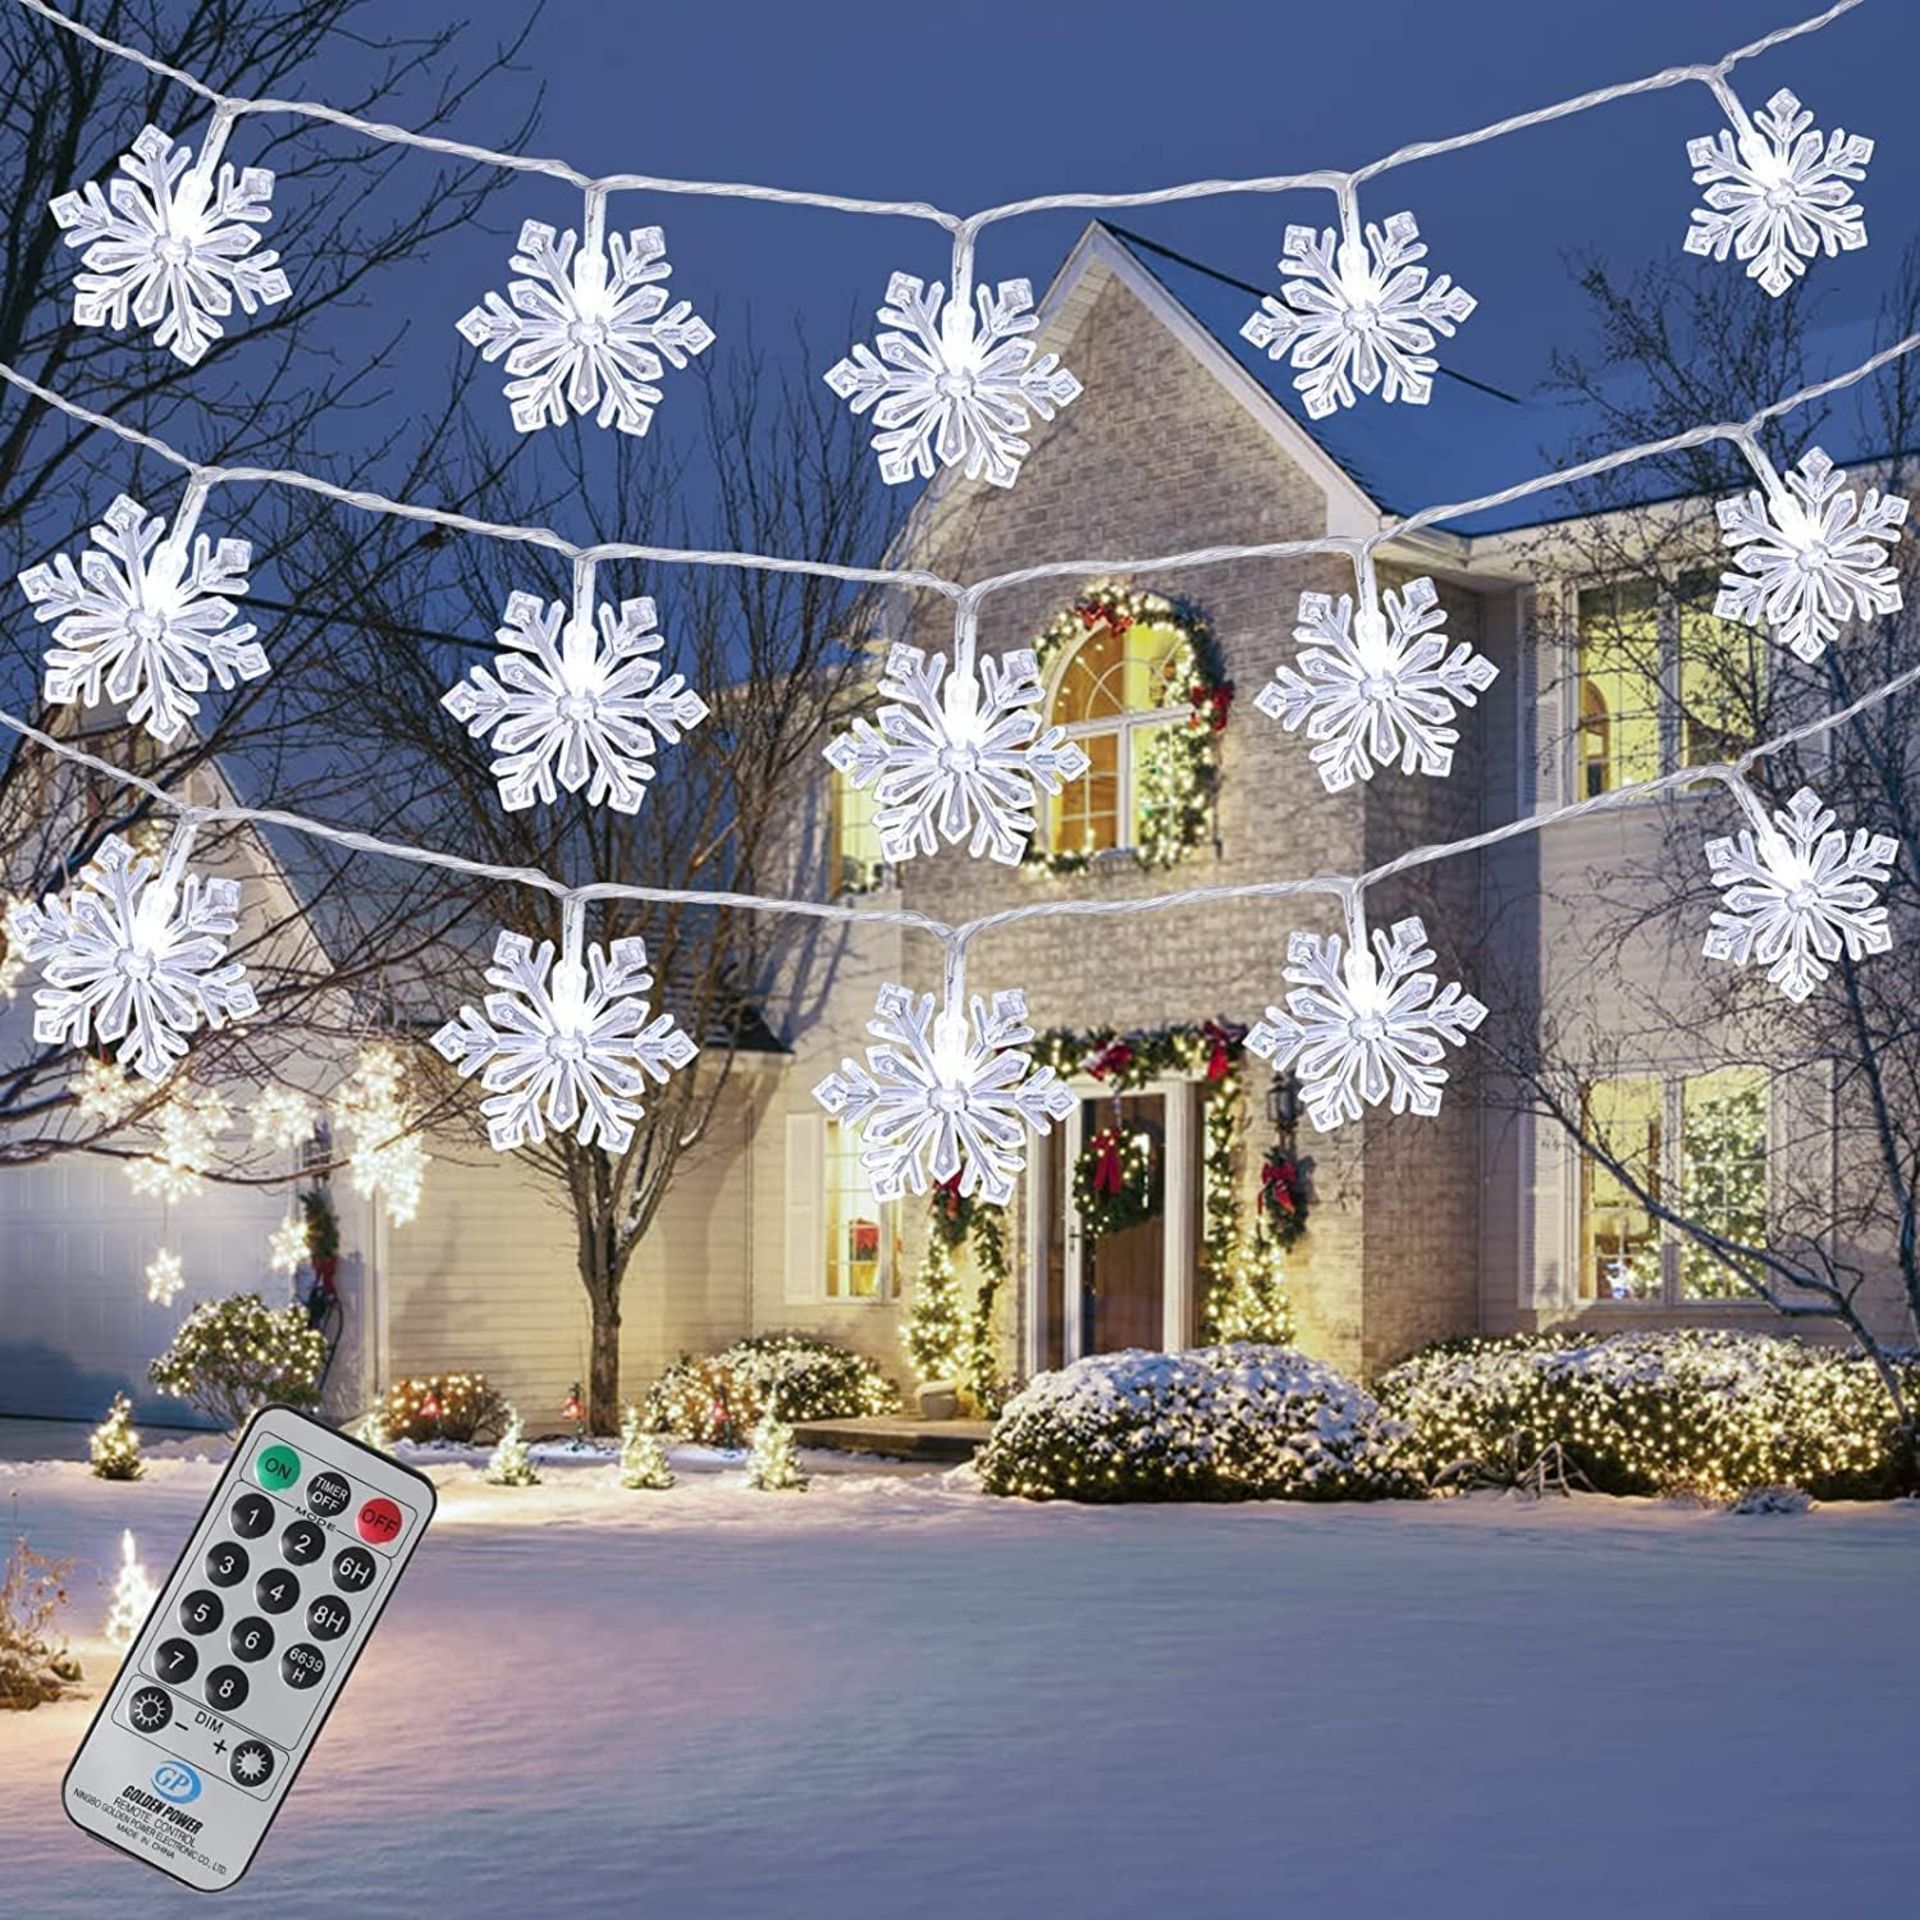 4 x NEW & BOXED SETS OF Snowflake String Lights, 8m/26ft 50 LED Fairy Lights Plug in, 8 Modes - Image 2 of 2